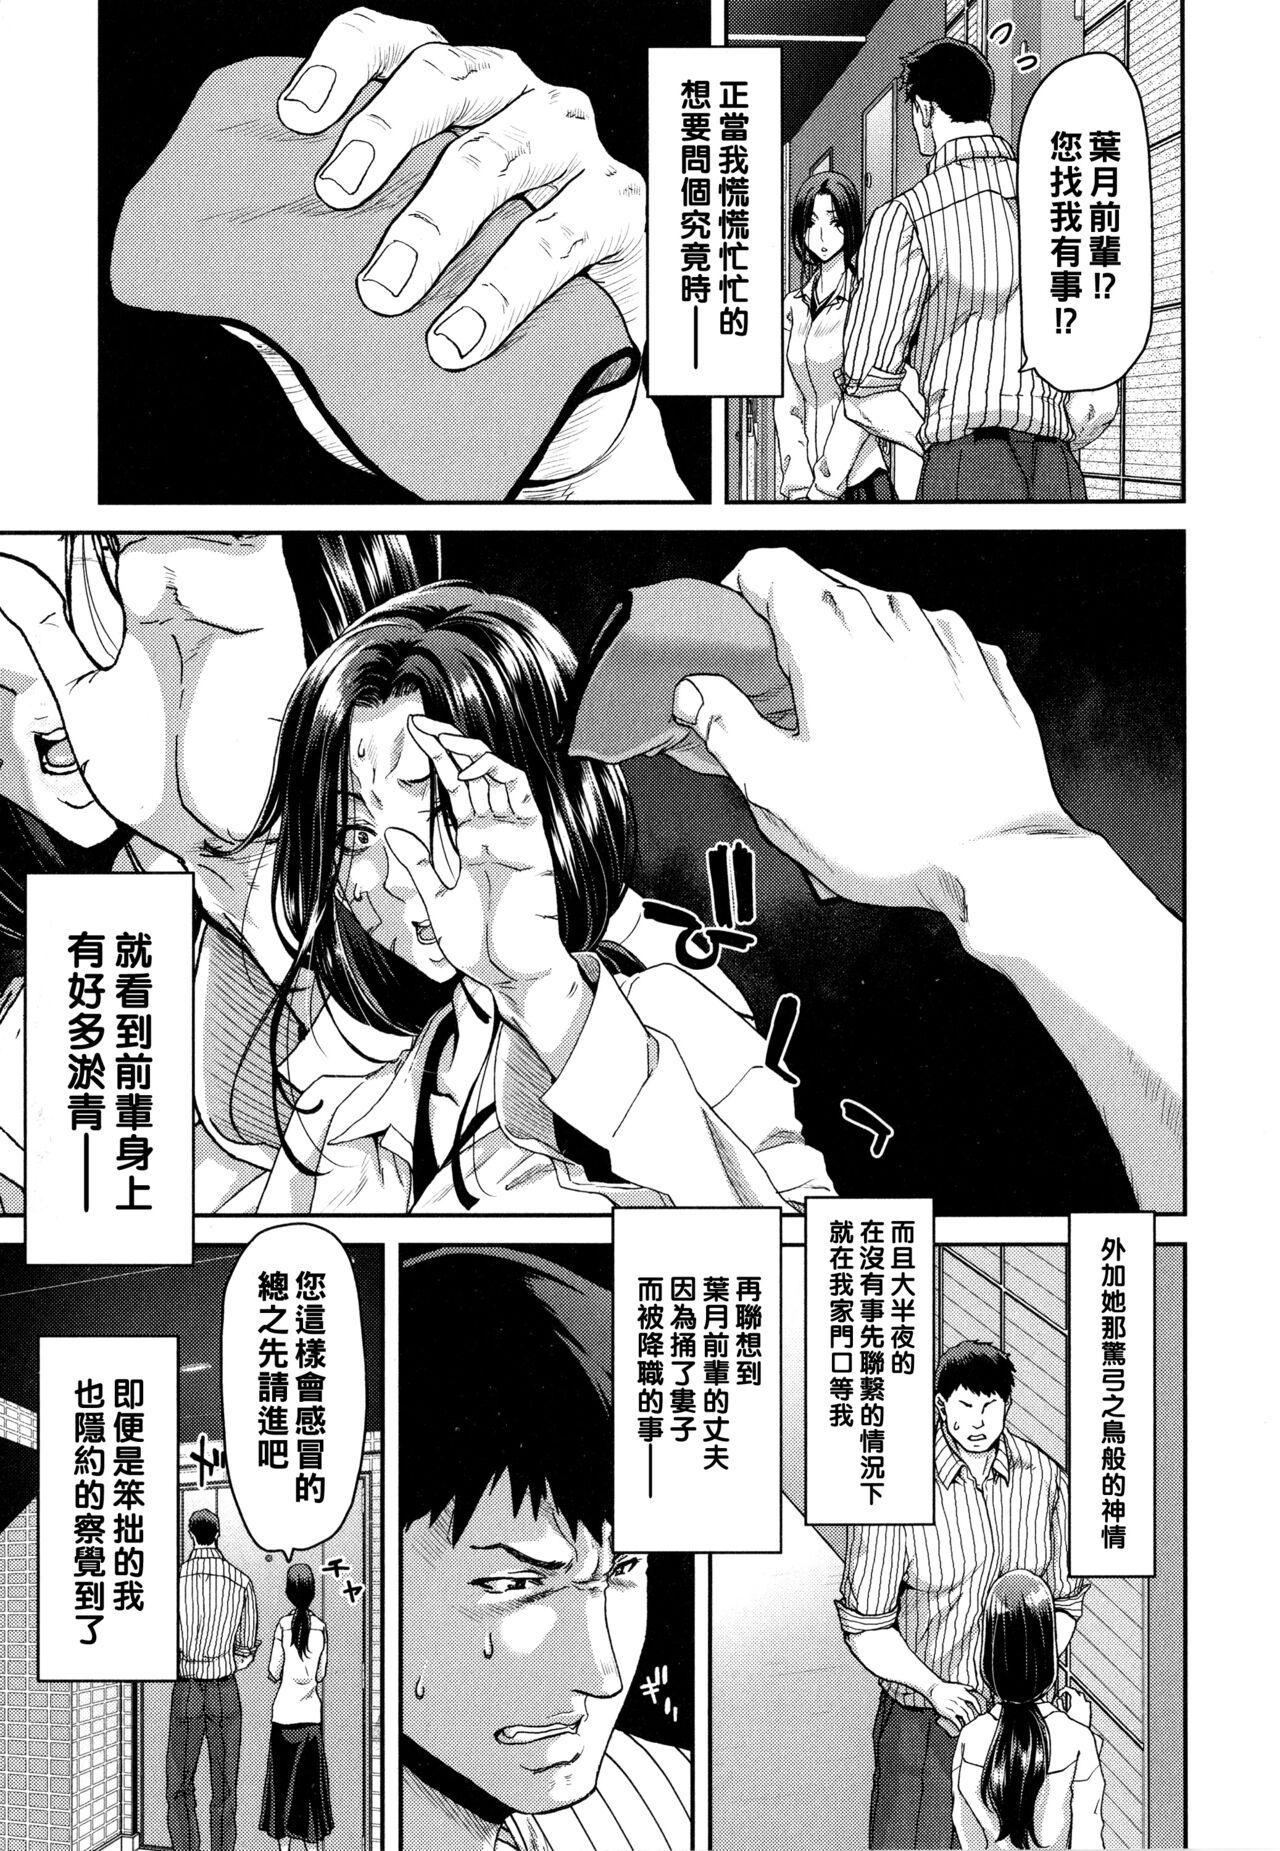 Assfingering Iede Onna o Hirottara - When I picked up a runaway girl. Job - Page 9